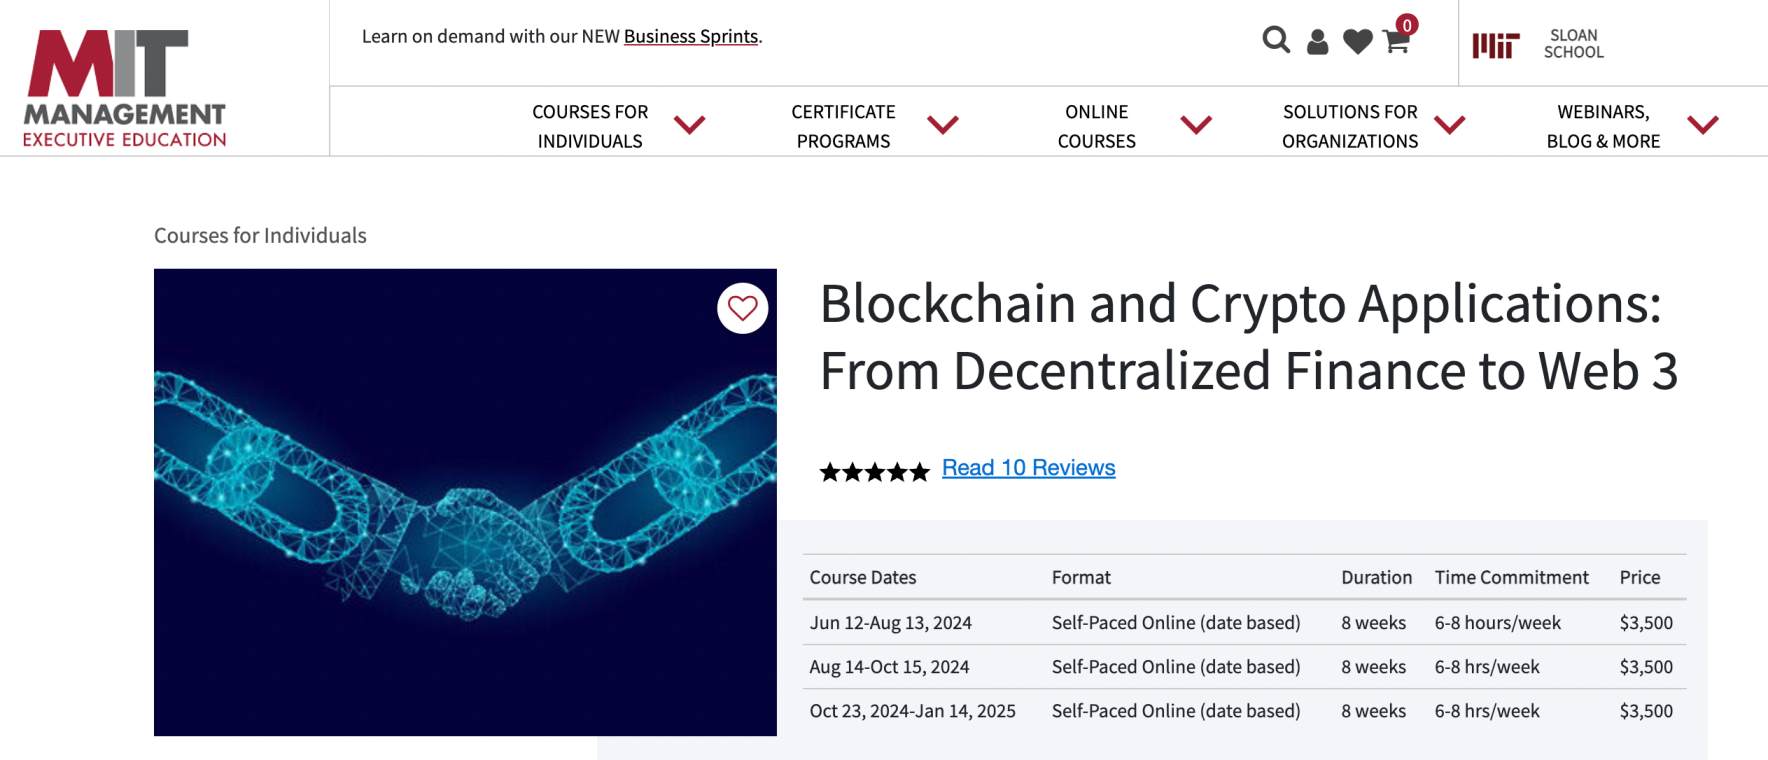 Blockchain and Crypto Applications course by MIT